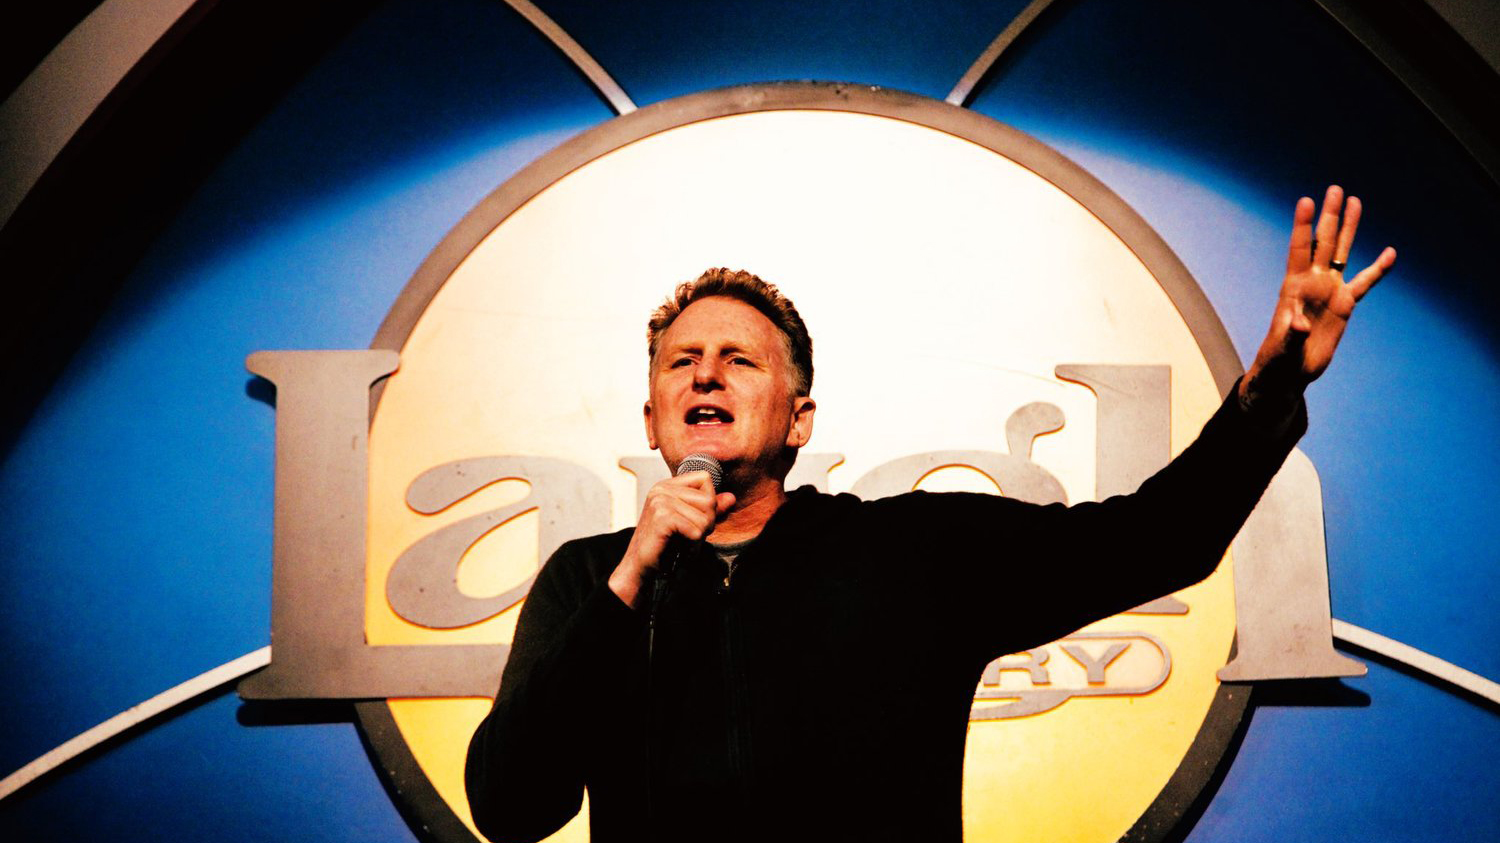 Comedian Michael Rapaport to perform in Indy